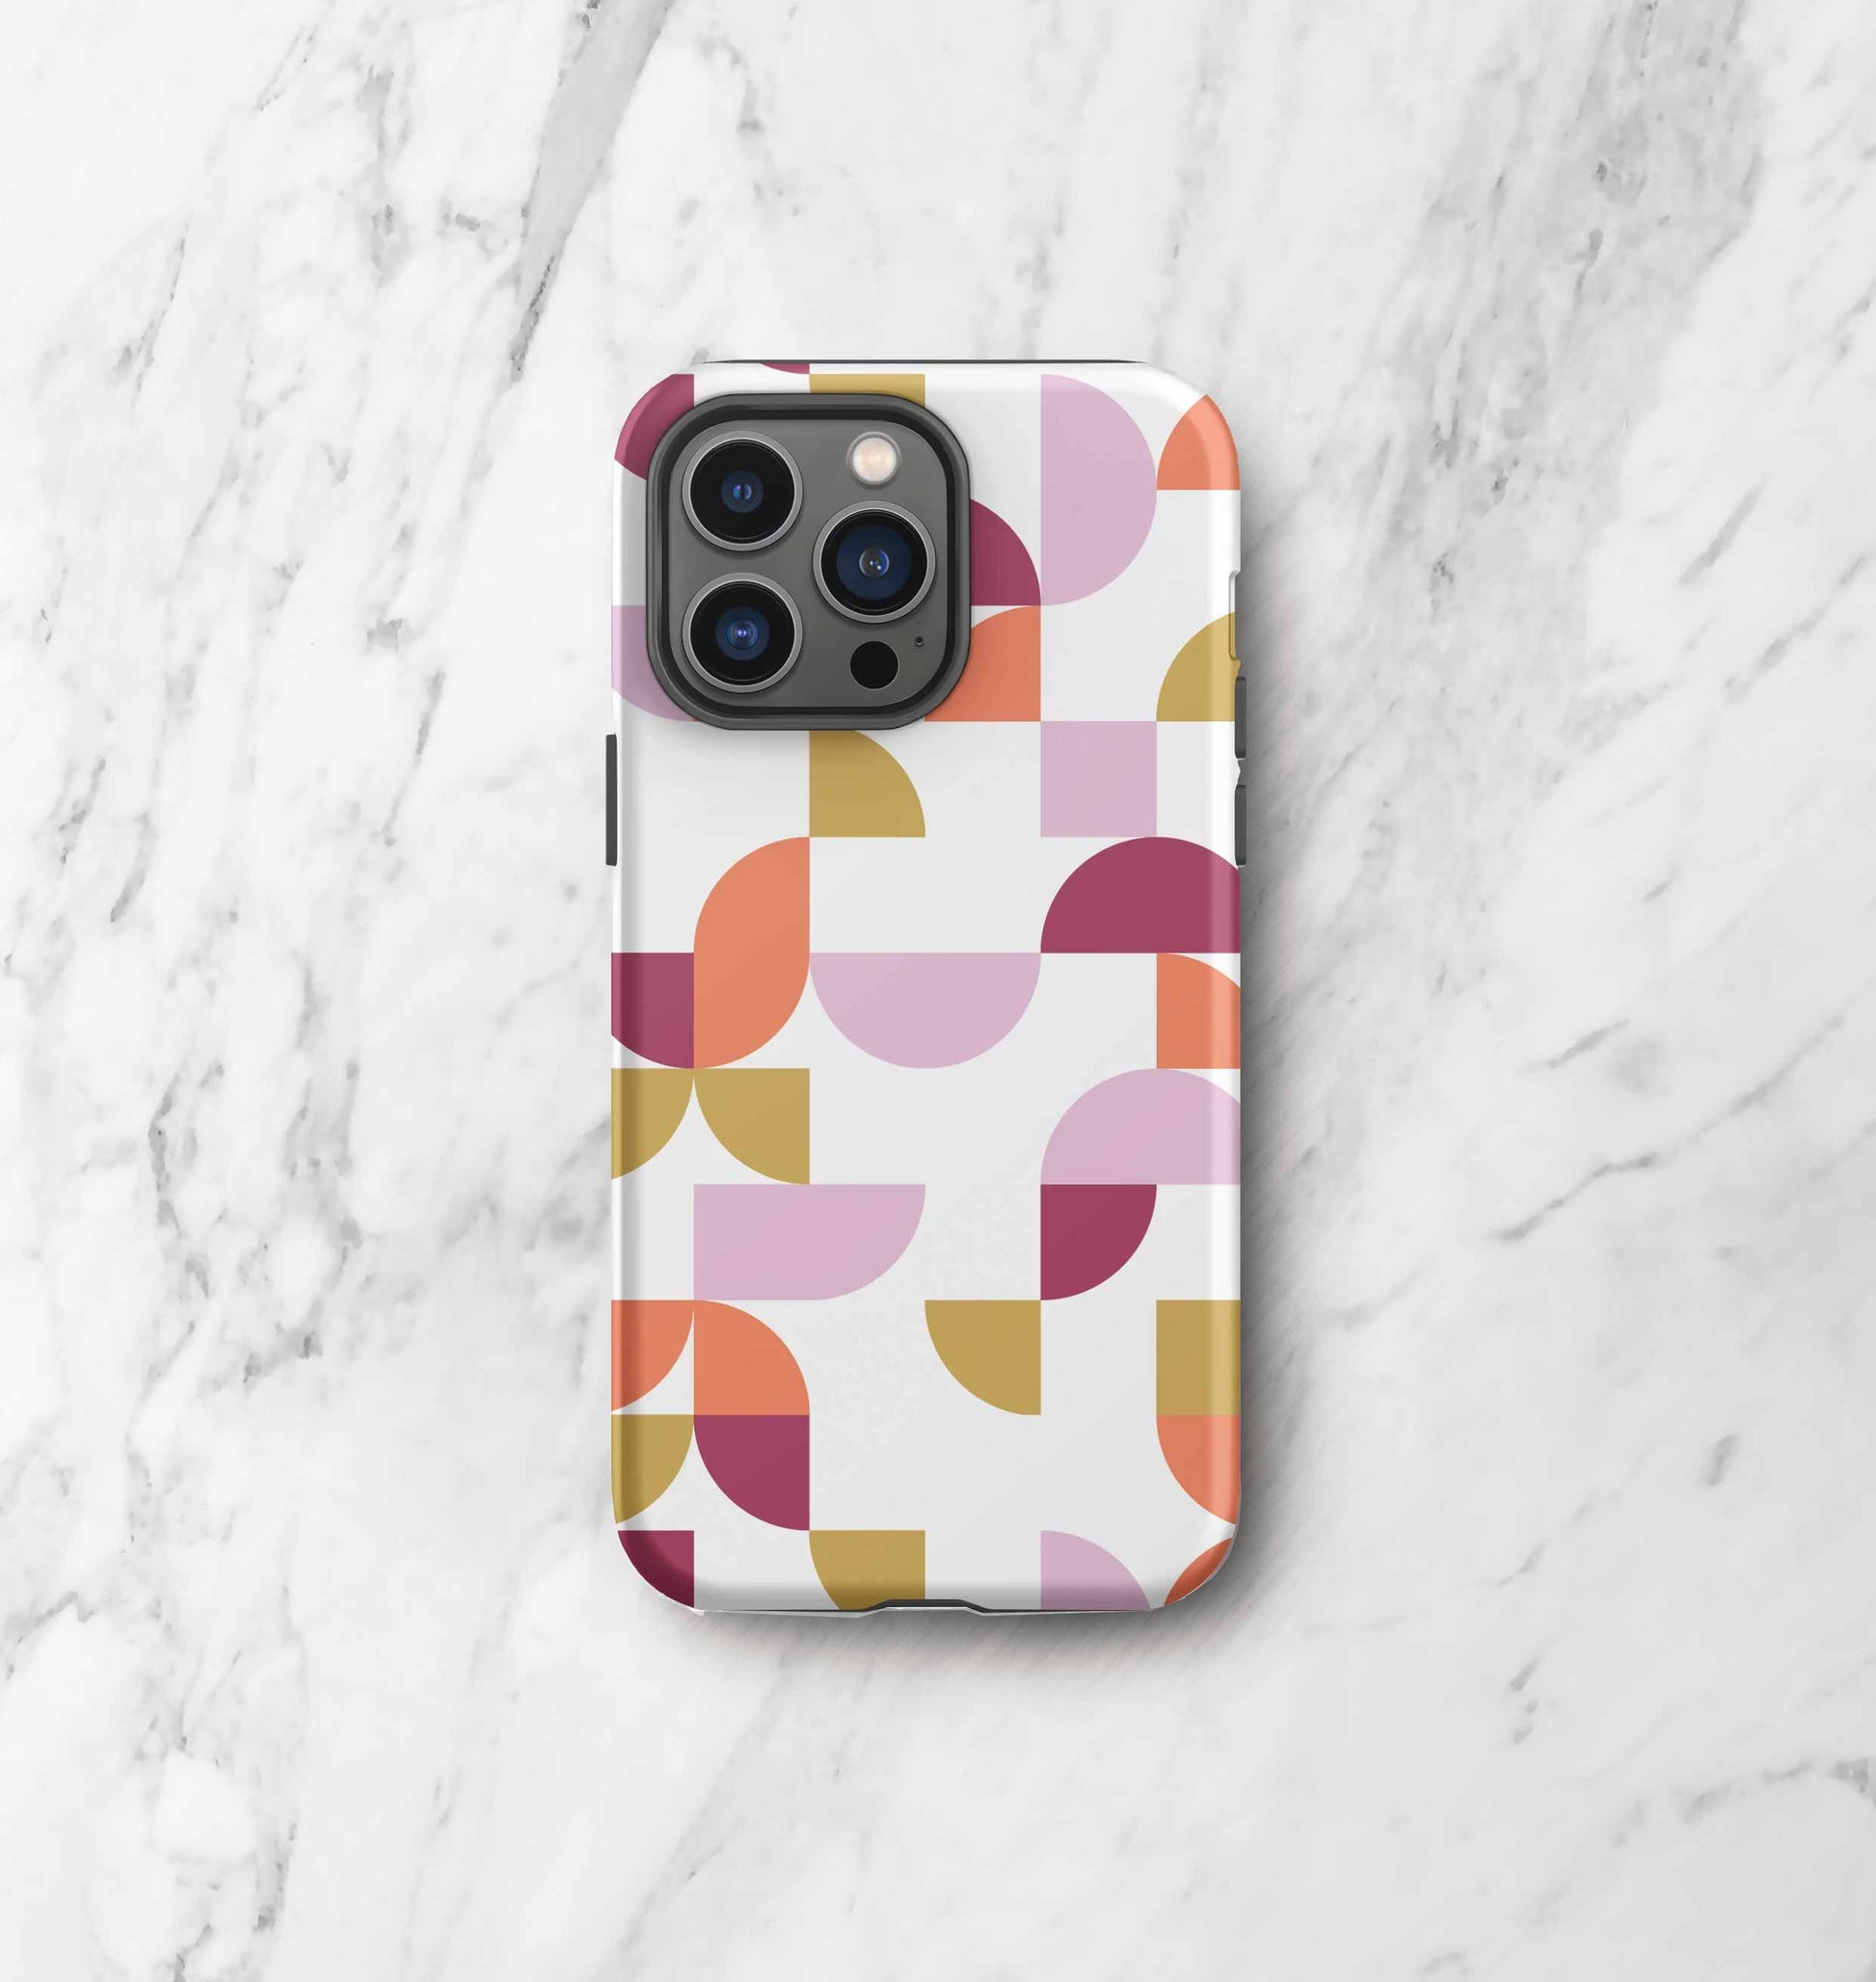 Front view of iPhone tough case in Geometria I Sunset design on a marble countertop